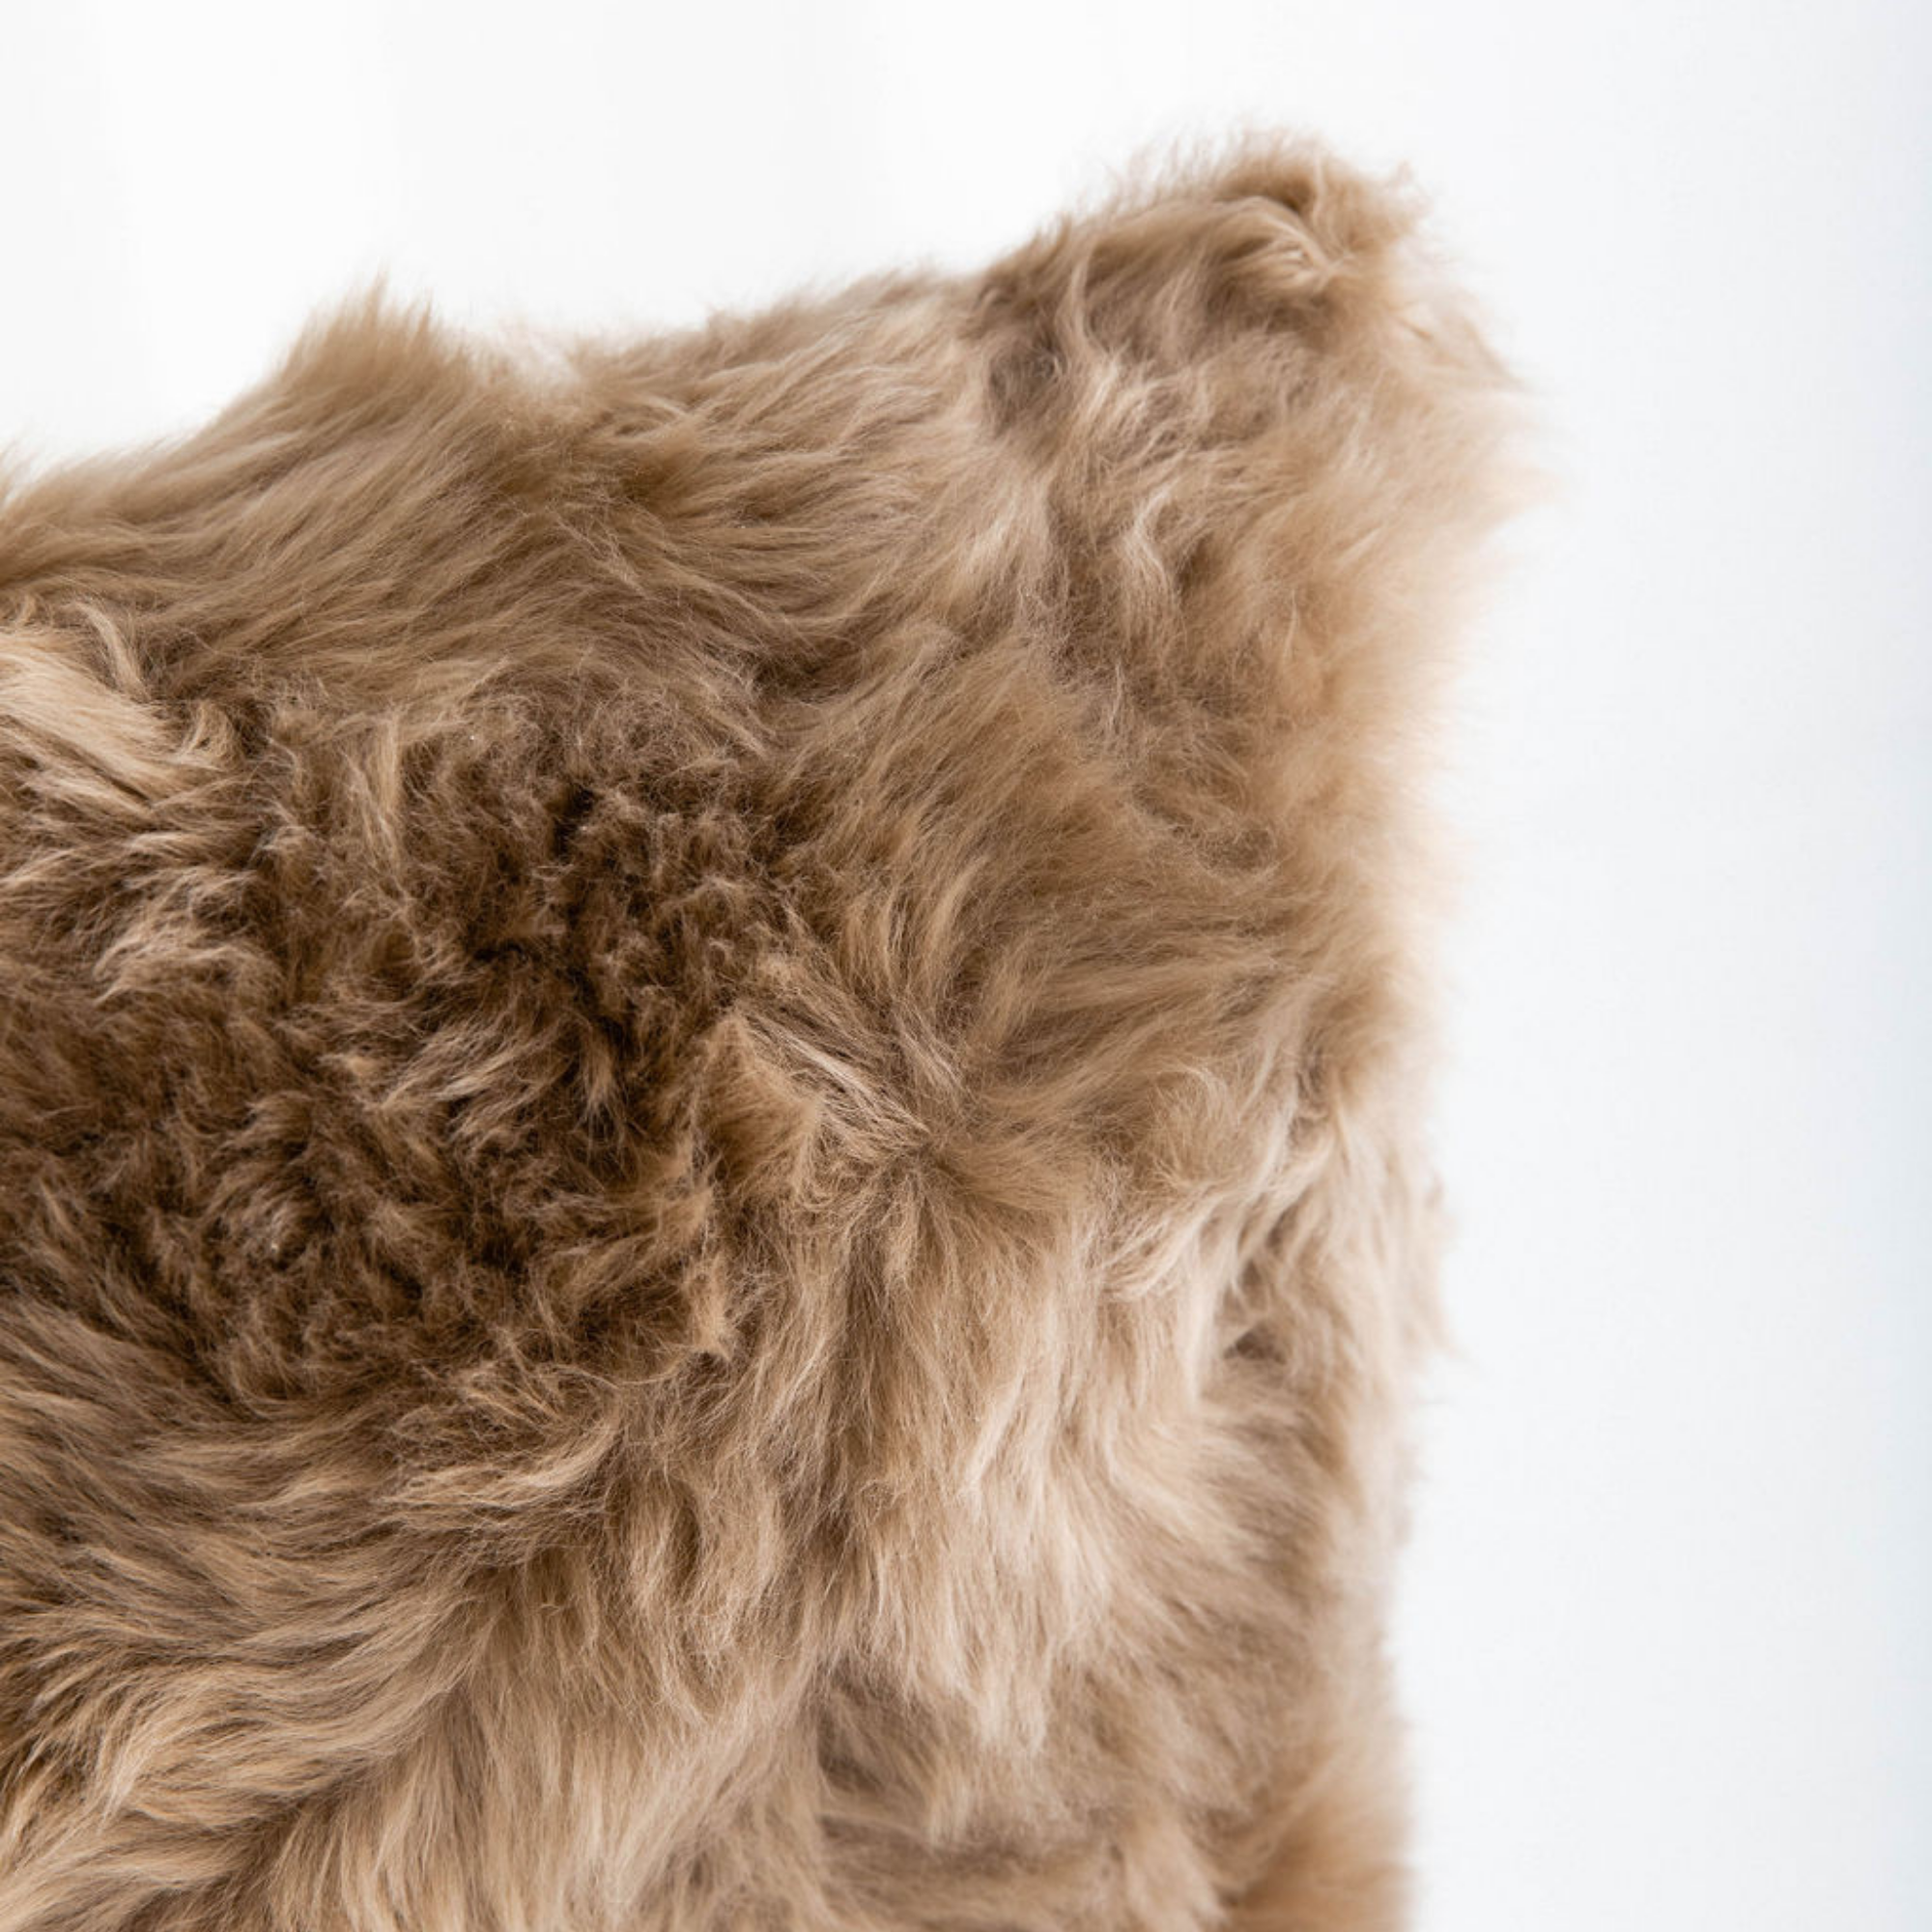 Add the premium Hawkesbury Sheepskin Cushion to your collection for a luxury hit of the softest all natural texture. Available in 2 sizes and an array of beautiful neutral hues, our shee